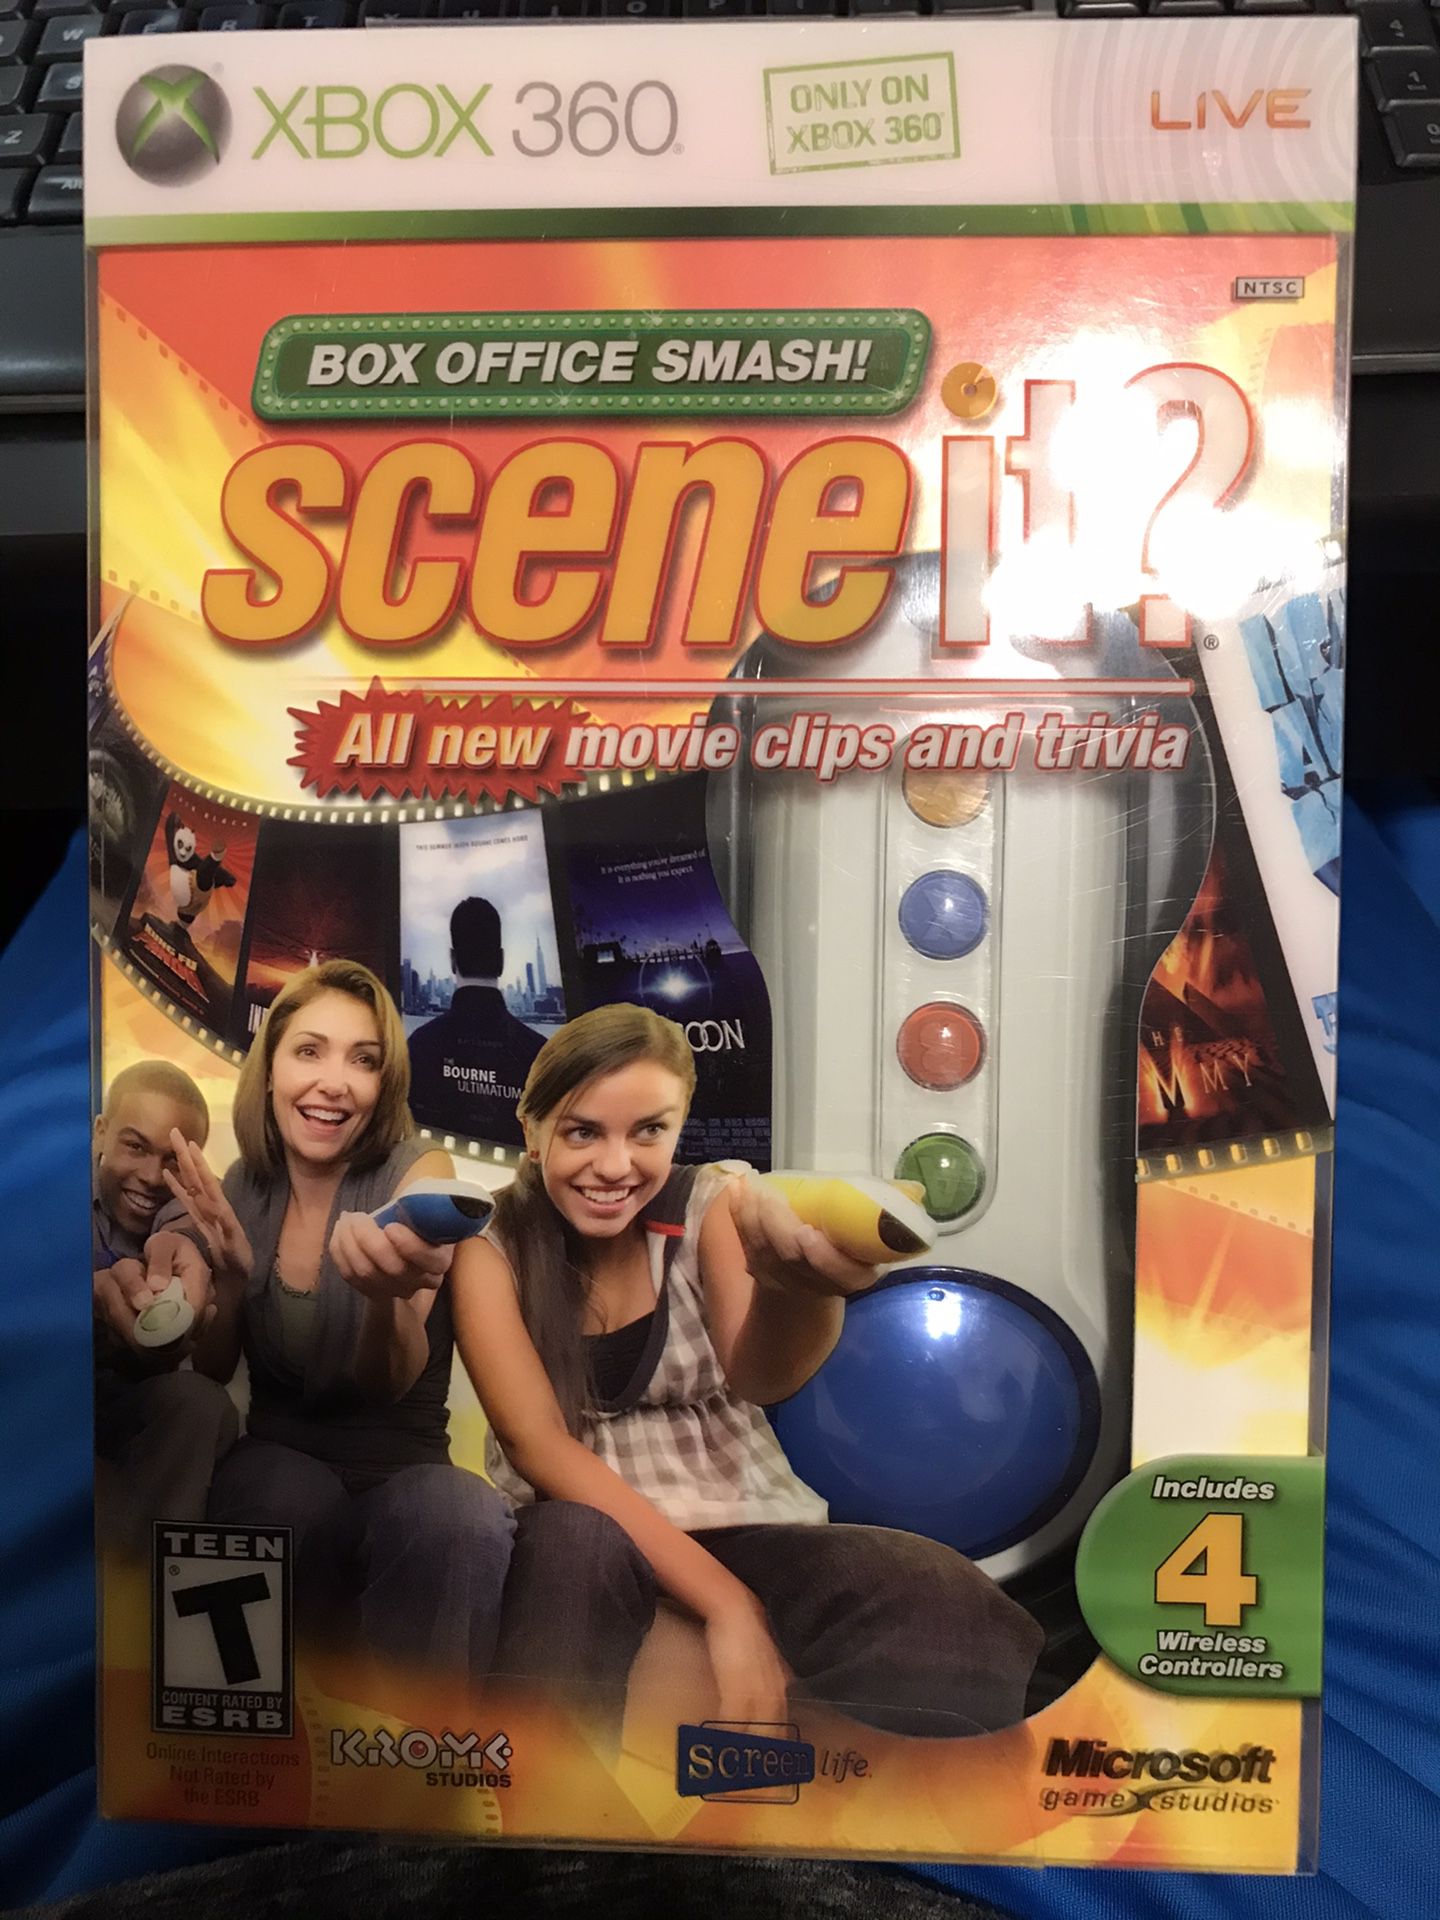 Xbox Scene it game bundle with 4 controllers